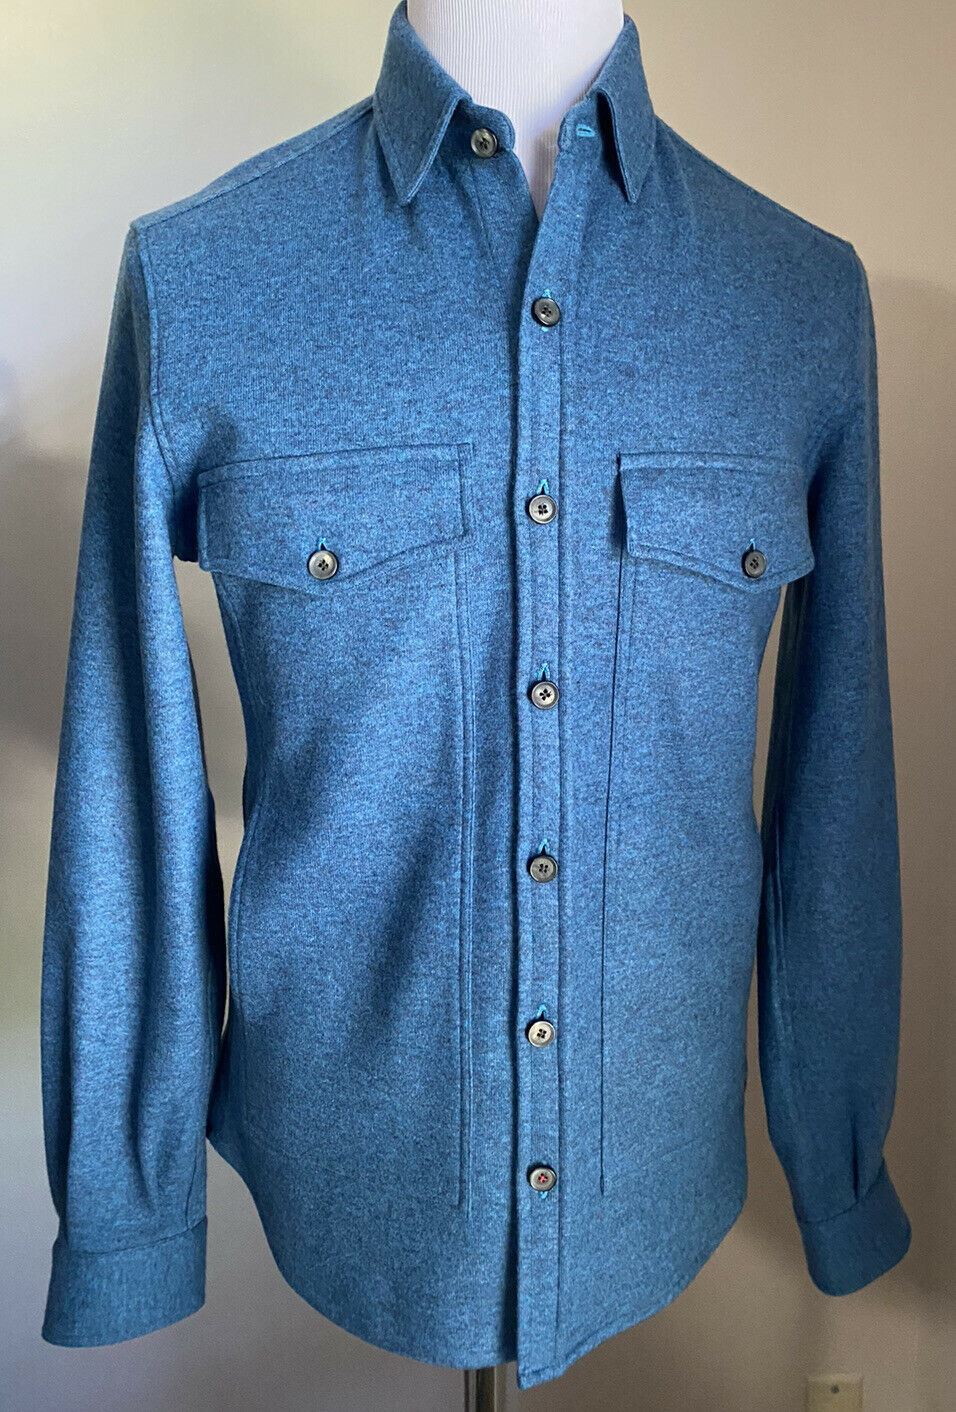 NWT $1750 Isaia Double Faced Cashmere Pullover Shirt Overshirt Teal Size S-M